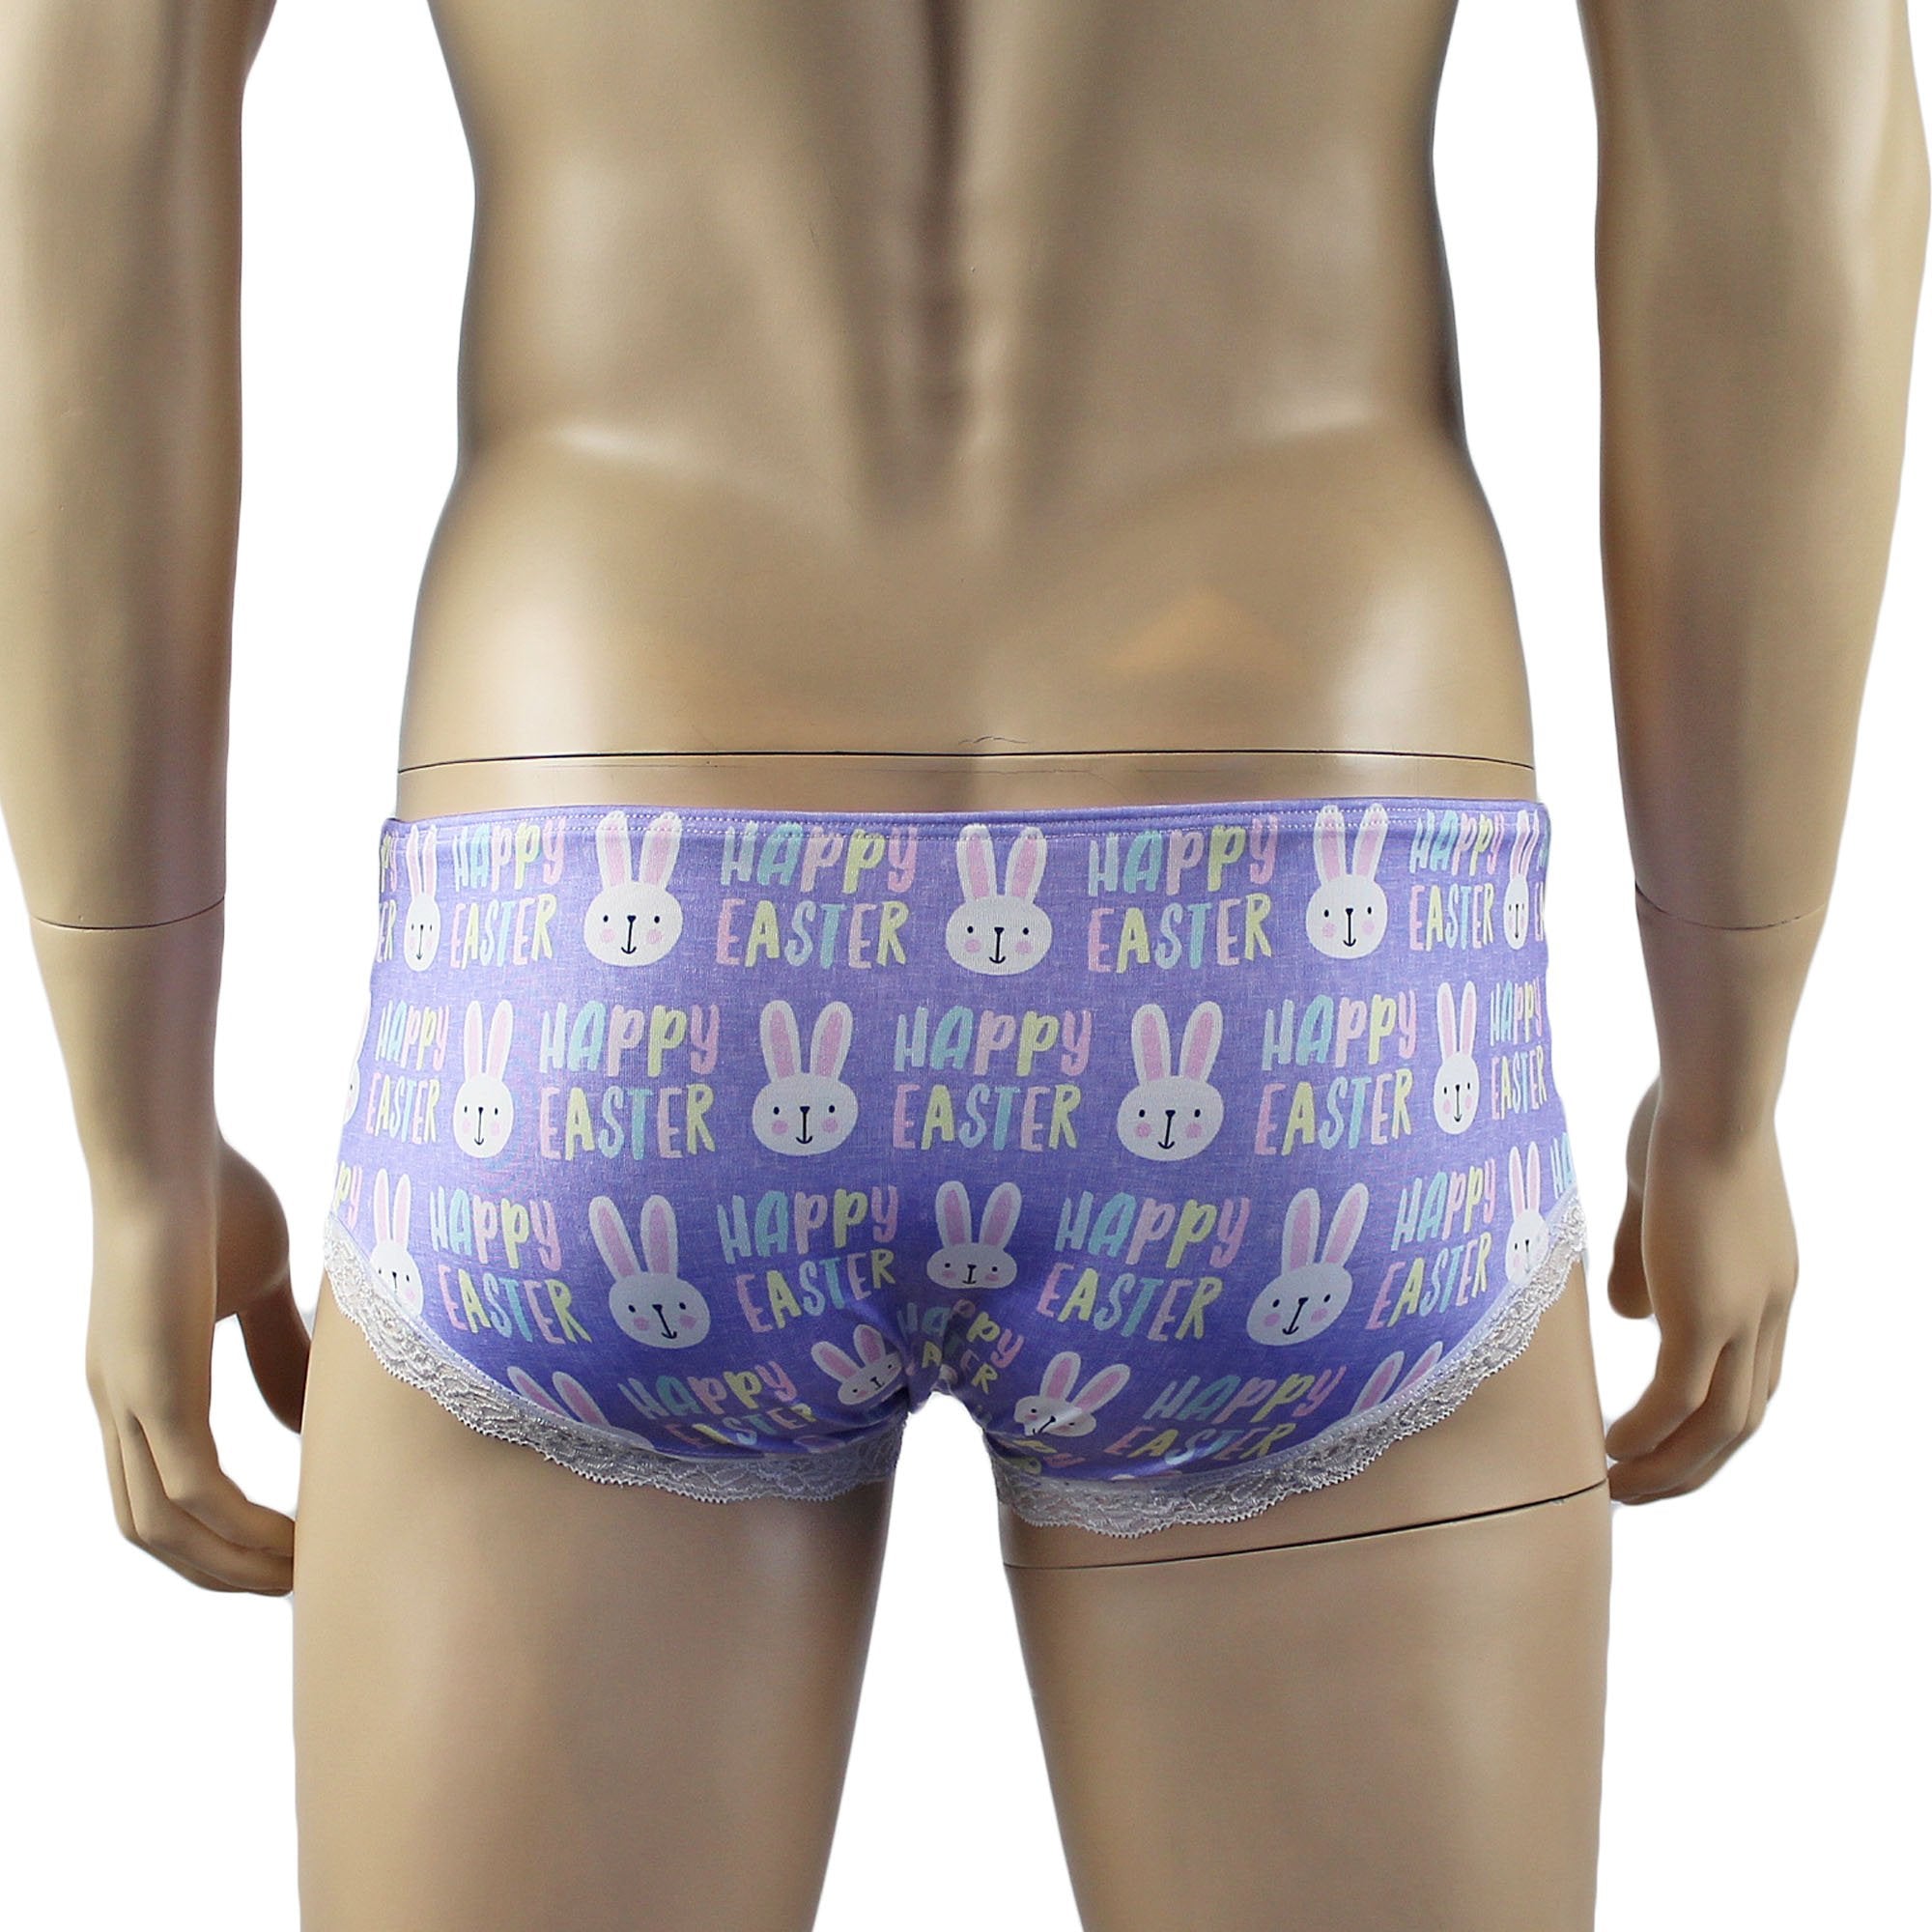 Mens Happy Easter Mens Lingerie Stretch Spandex & Lace Panty Brief